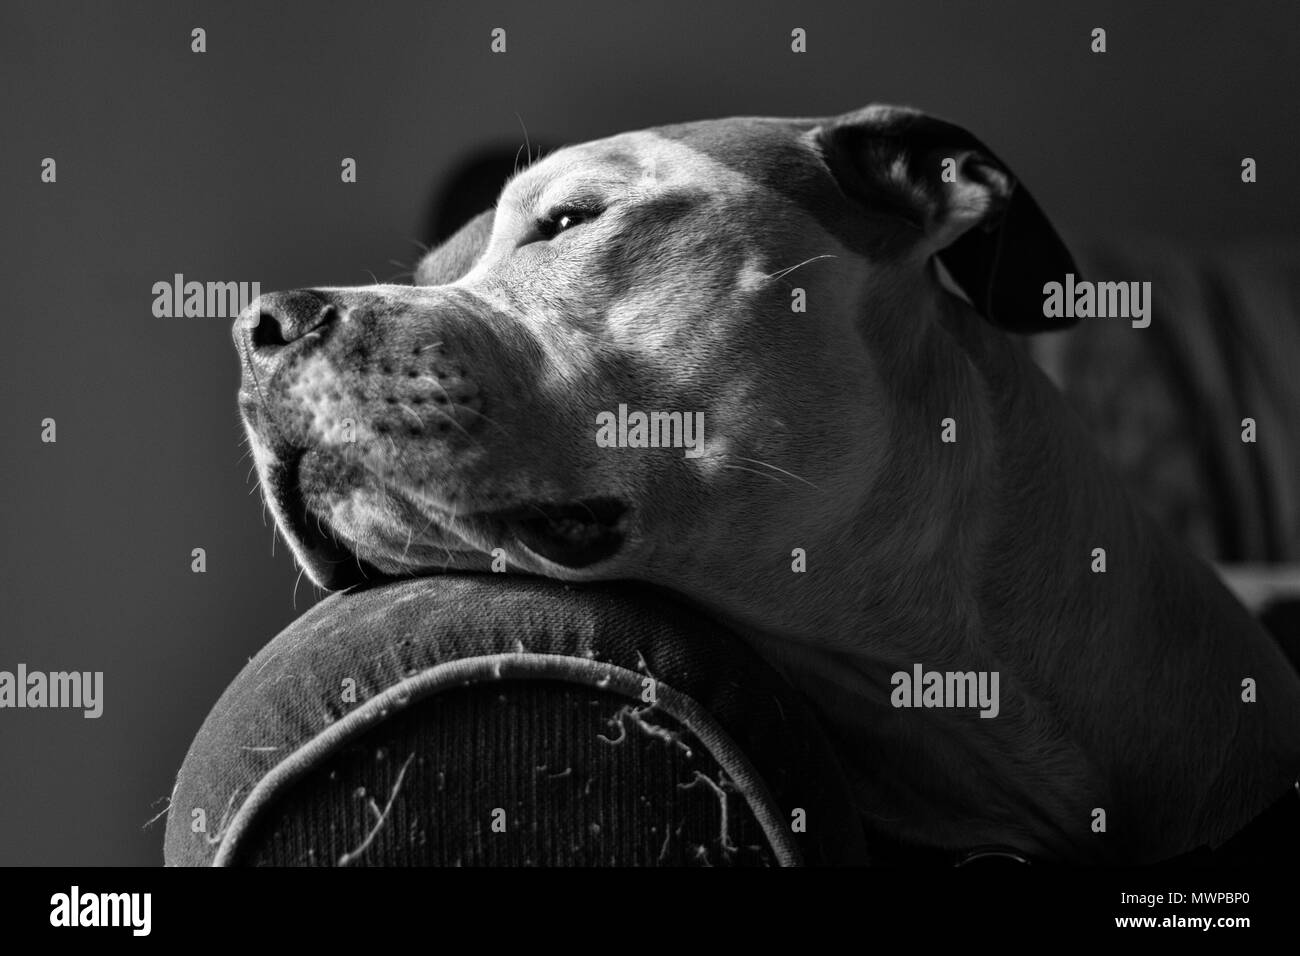 A mixed breed pitbull dog (American and American Staffordshire Pit Bull Terriers) (Canis lupus familiaris) rests, looking content and noble. Stock Photo